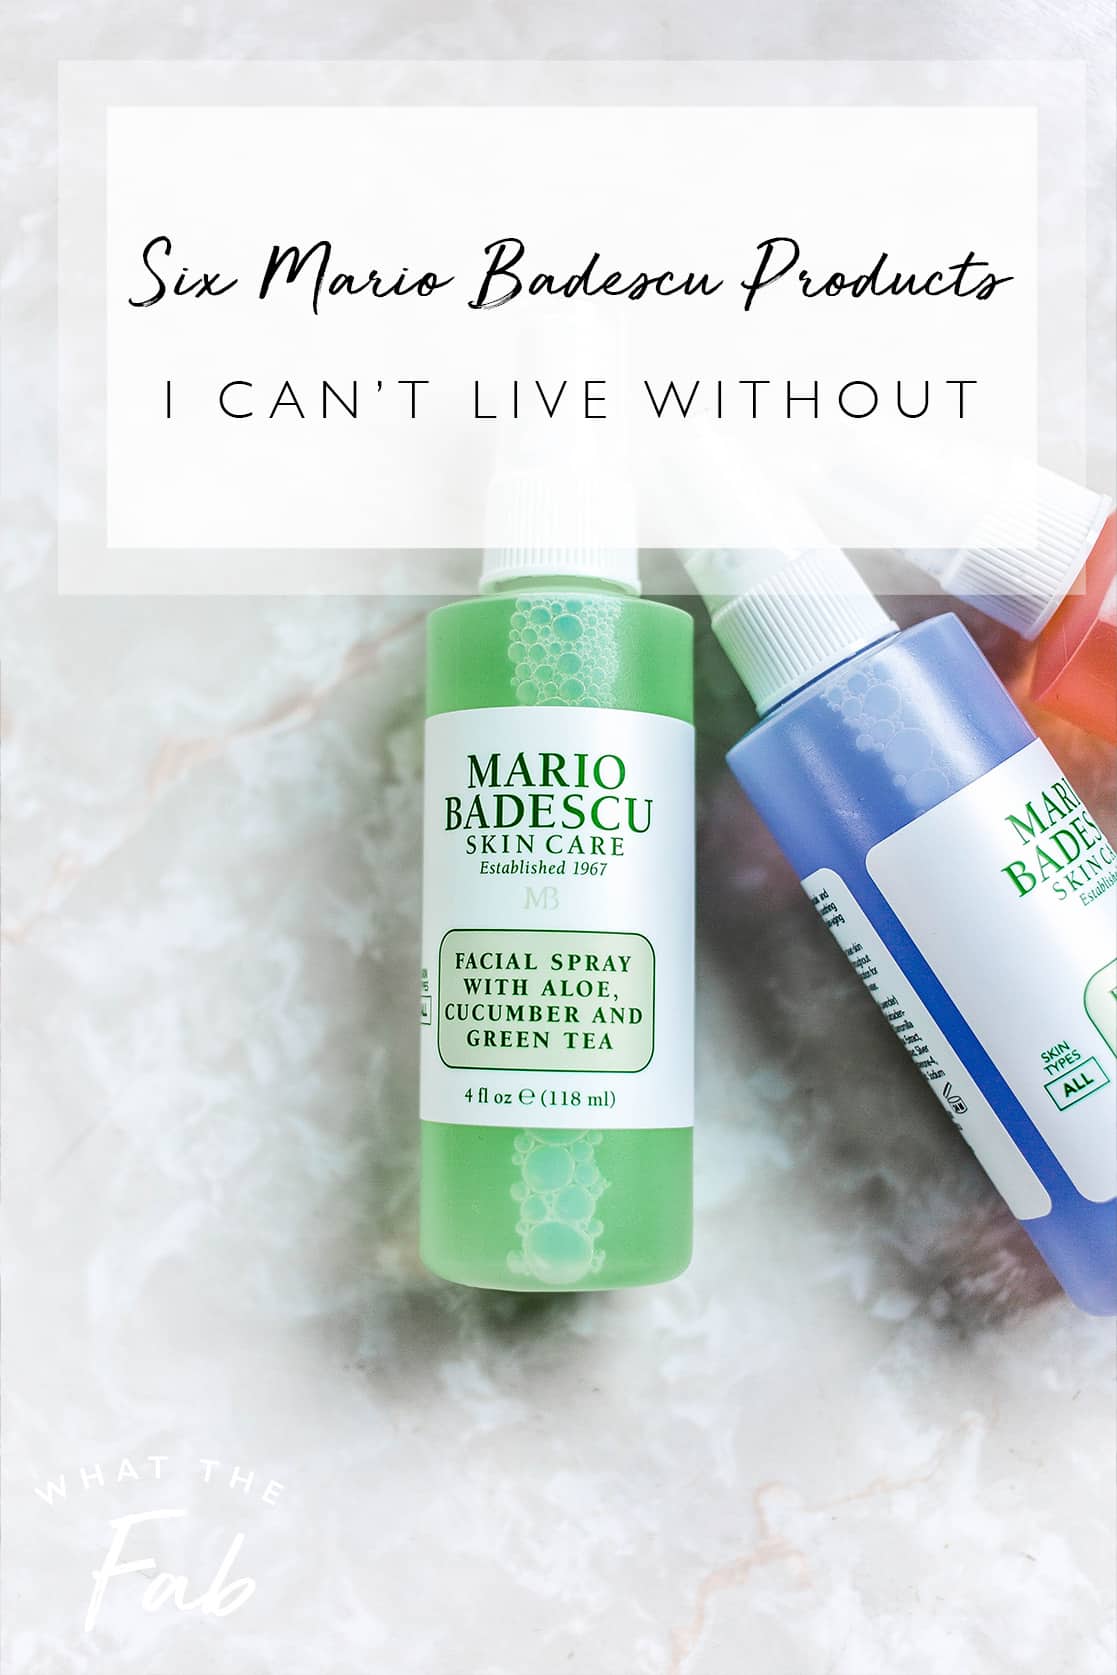 otte Skøn Medicinsk malpractice An Honest Mario Badescu Review: The 6 Products I CAN'T Live Without